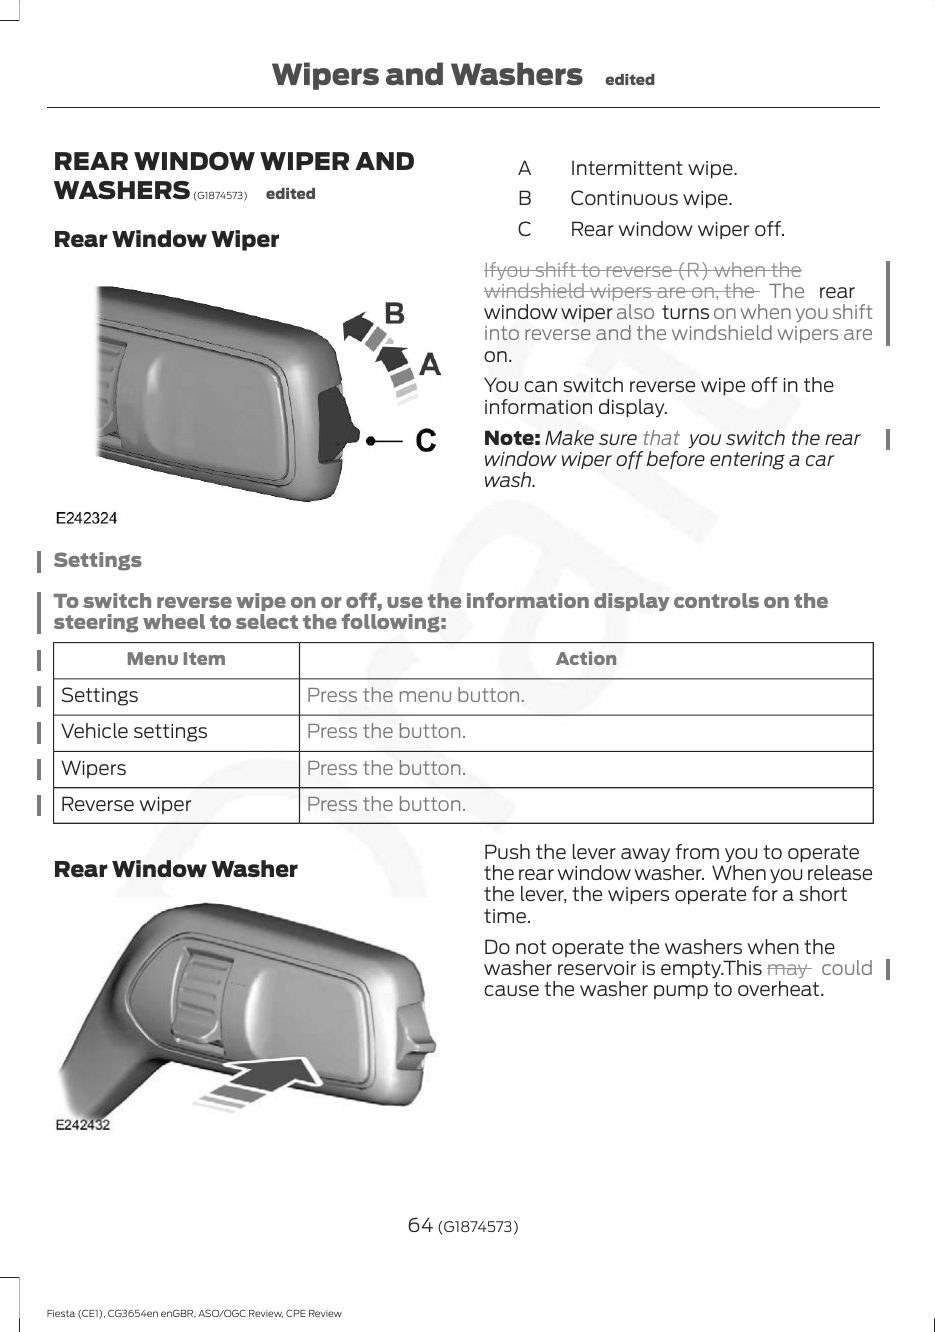 REAR WINDOW WIPER ANDWASHERS (G1874573) editedRear Window WiperIntermittent wipe.AContinuous wipe.BRear window wiper off.CIfyou shift to reverse (R) when thewindshield wipers are on, the  The   rearwindow wiper also turns on when you shiftinto reverse and the windshield wipers areon.You can switch reverse wipe off in theinformation display.Note: Make sure that  you switch the rearwindow wiper off before entering a carwash.SettingsTo switch reverse wipe on or off, use the information display controls on thesteering wheel to select the following:ActionMenu ItemPress the menu button.SettingsPress the button.Vehicle settingsPress the button.WipersPress the button.Reverse wiperRear Window Washer Push the lever away from you to operatethe rear window washer.  When you releasethe lever, the wipers operate for a shorttime.Do not operate the washers when thewasher reservoir is empty.This may  couldcause the washer pump to overheat.64 (G1874573)Fiesta (CE1), CG3654en enGBR, ASO/OGC Review, CPE ReviewWipers and Washers edited